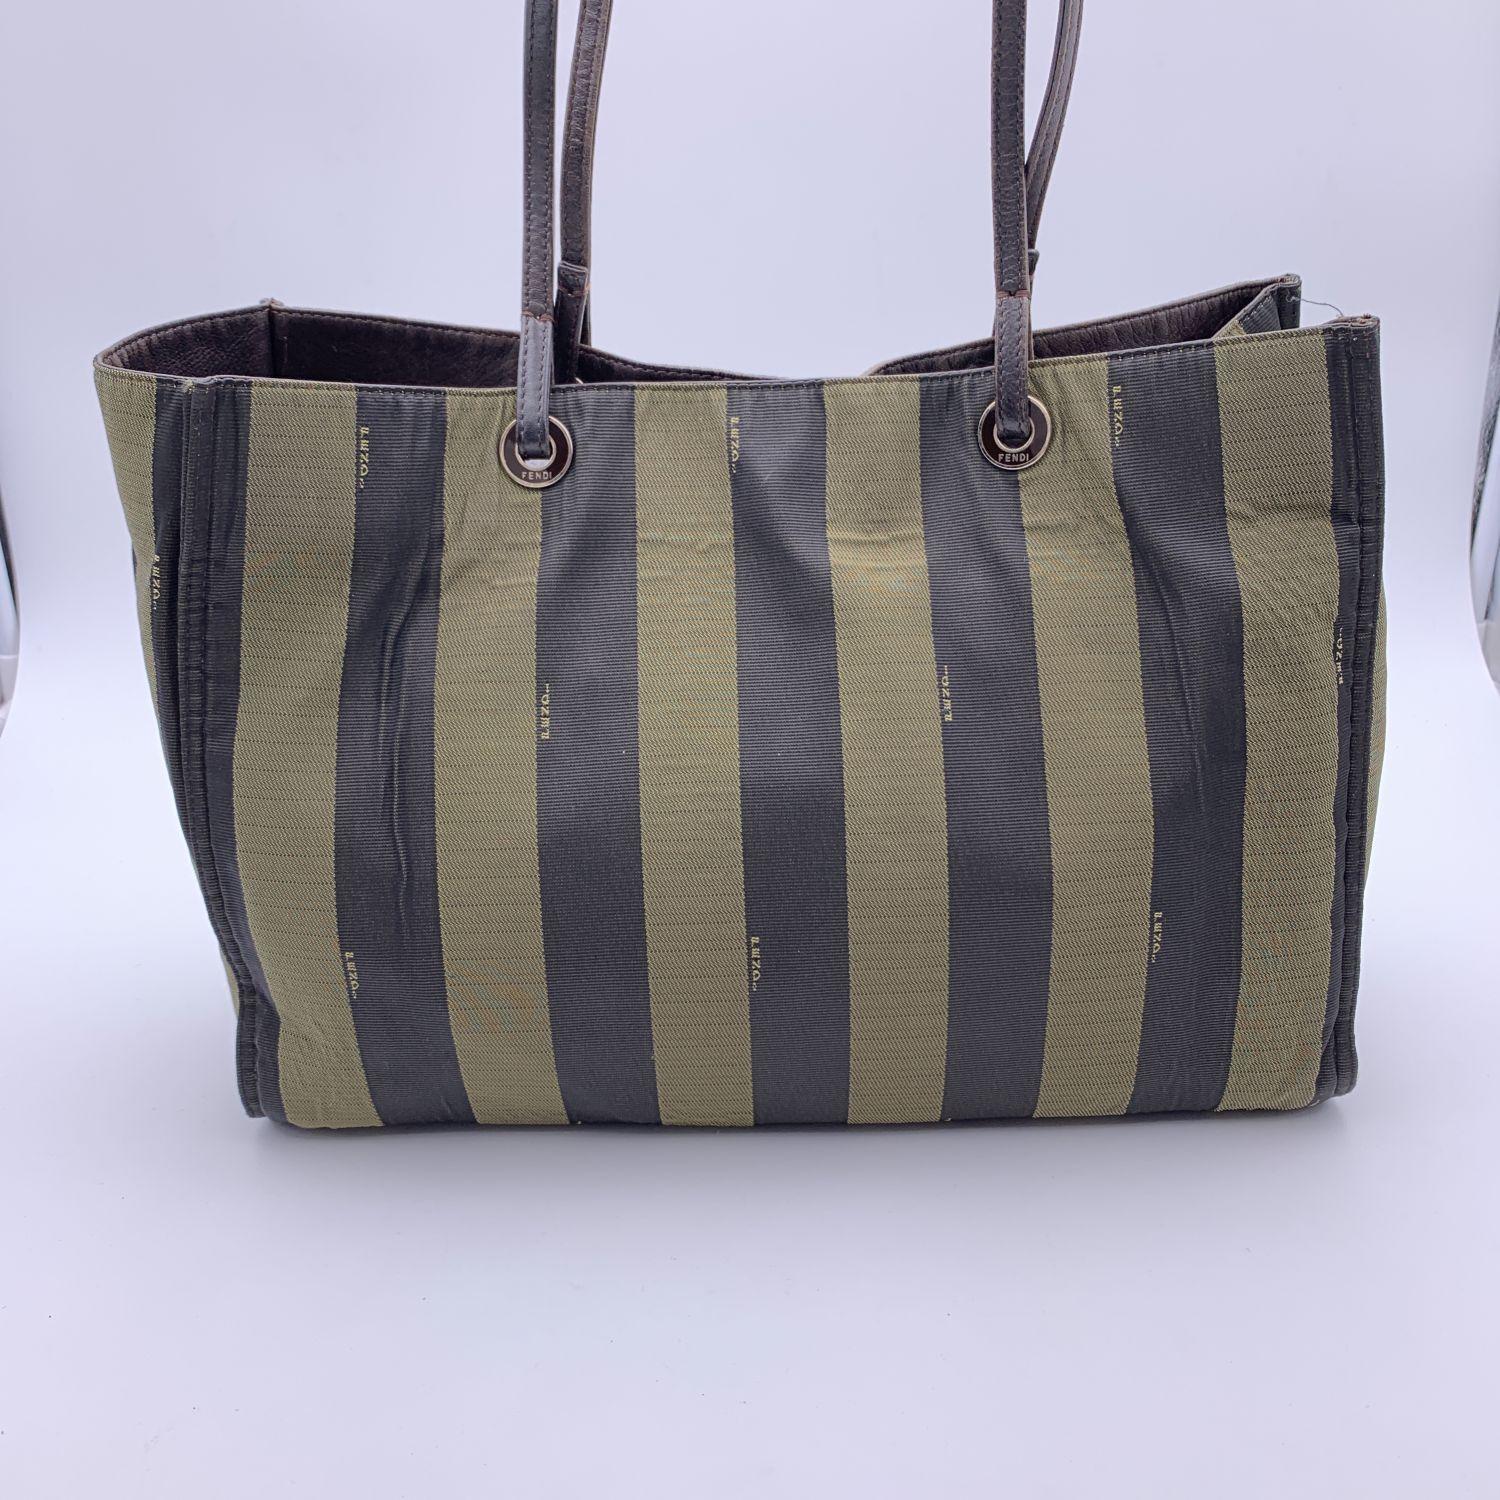 striped canvas tote handbags manufacturers